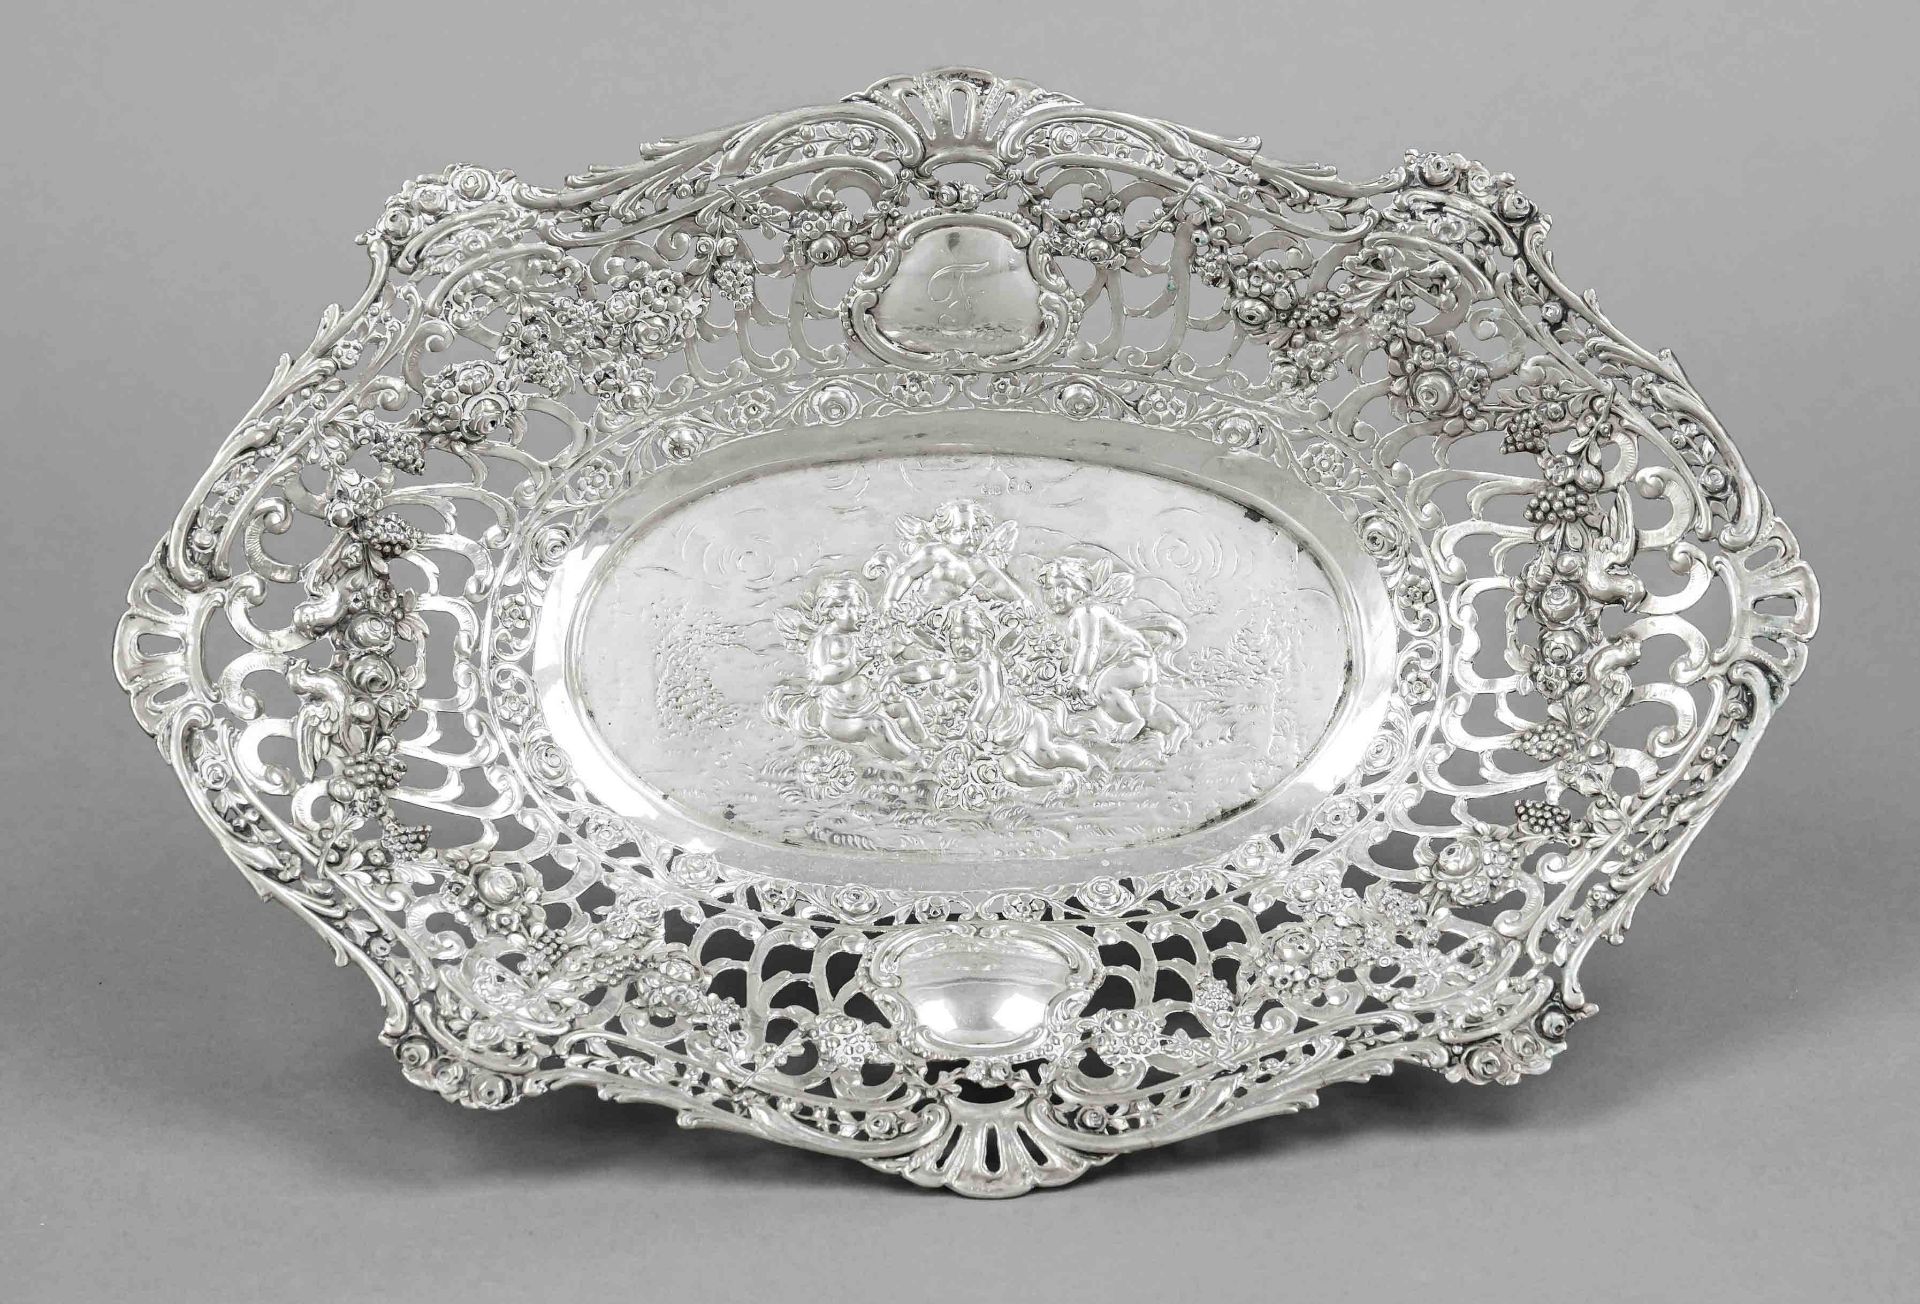 Oval openwork basket, German, 20th century, silver 800/000, of matching curved form, wide, richly